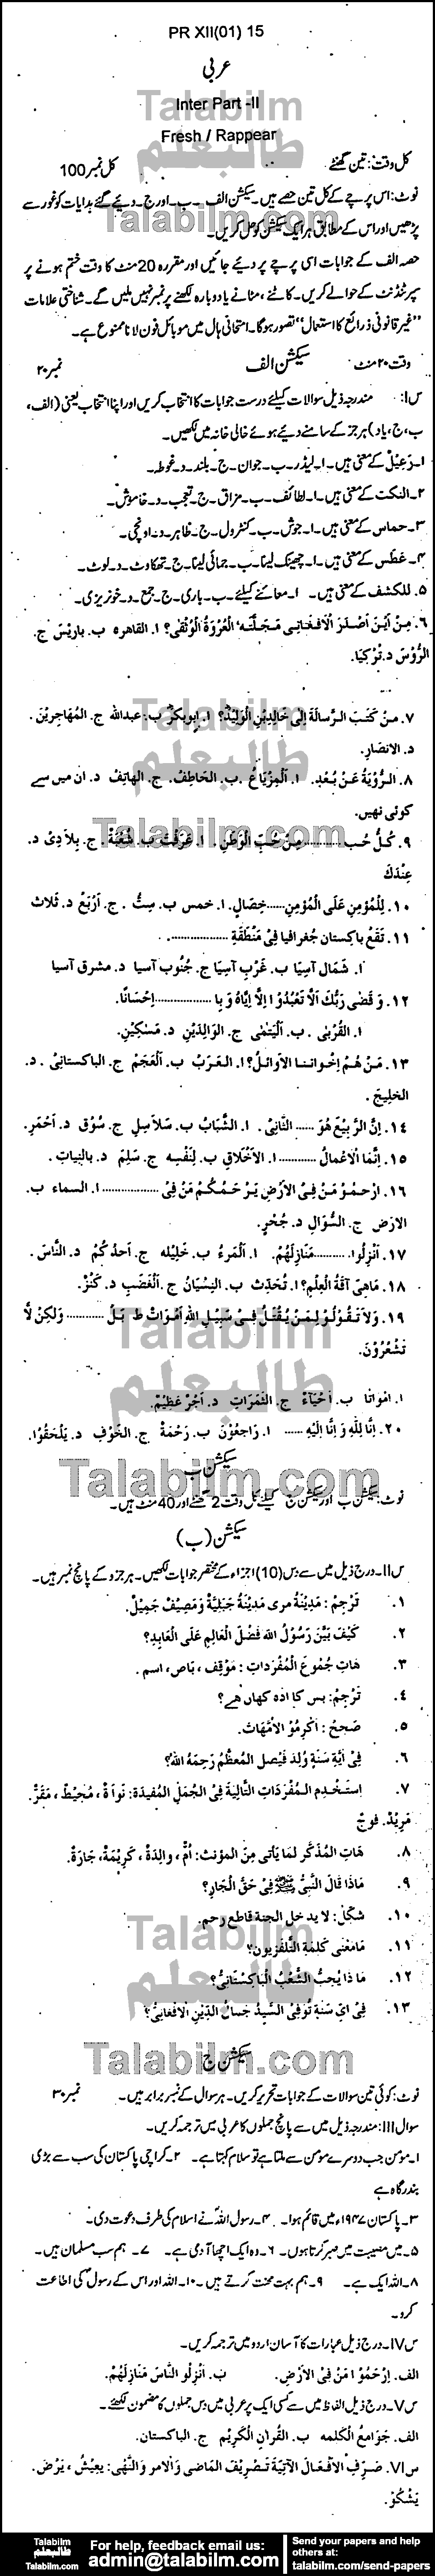 Arabic 0 past paper for Group-I 2015